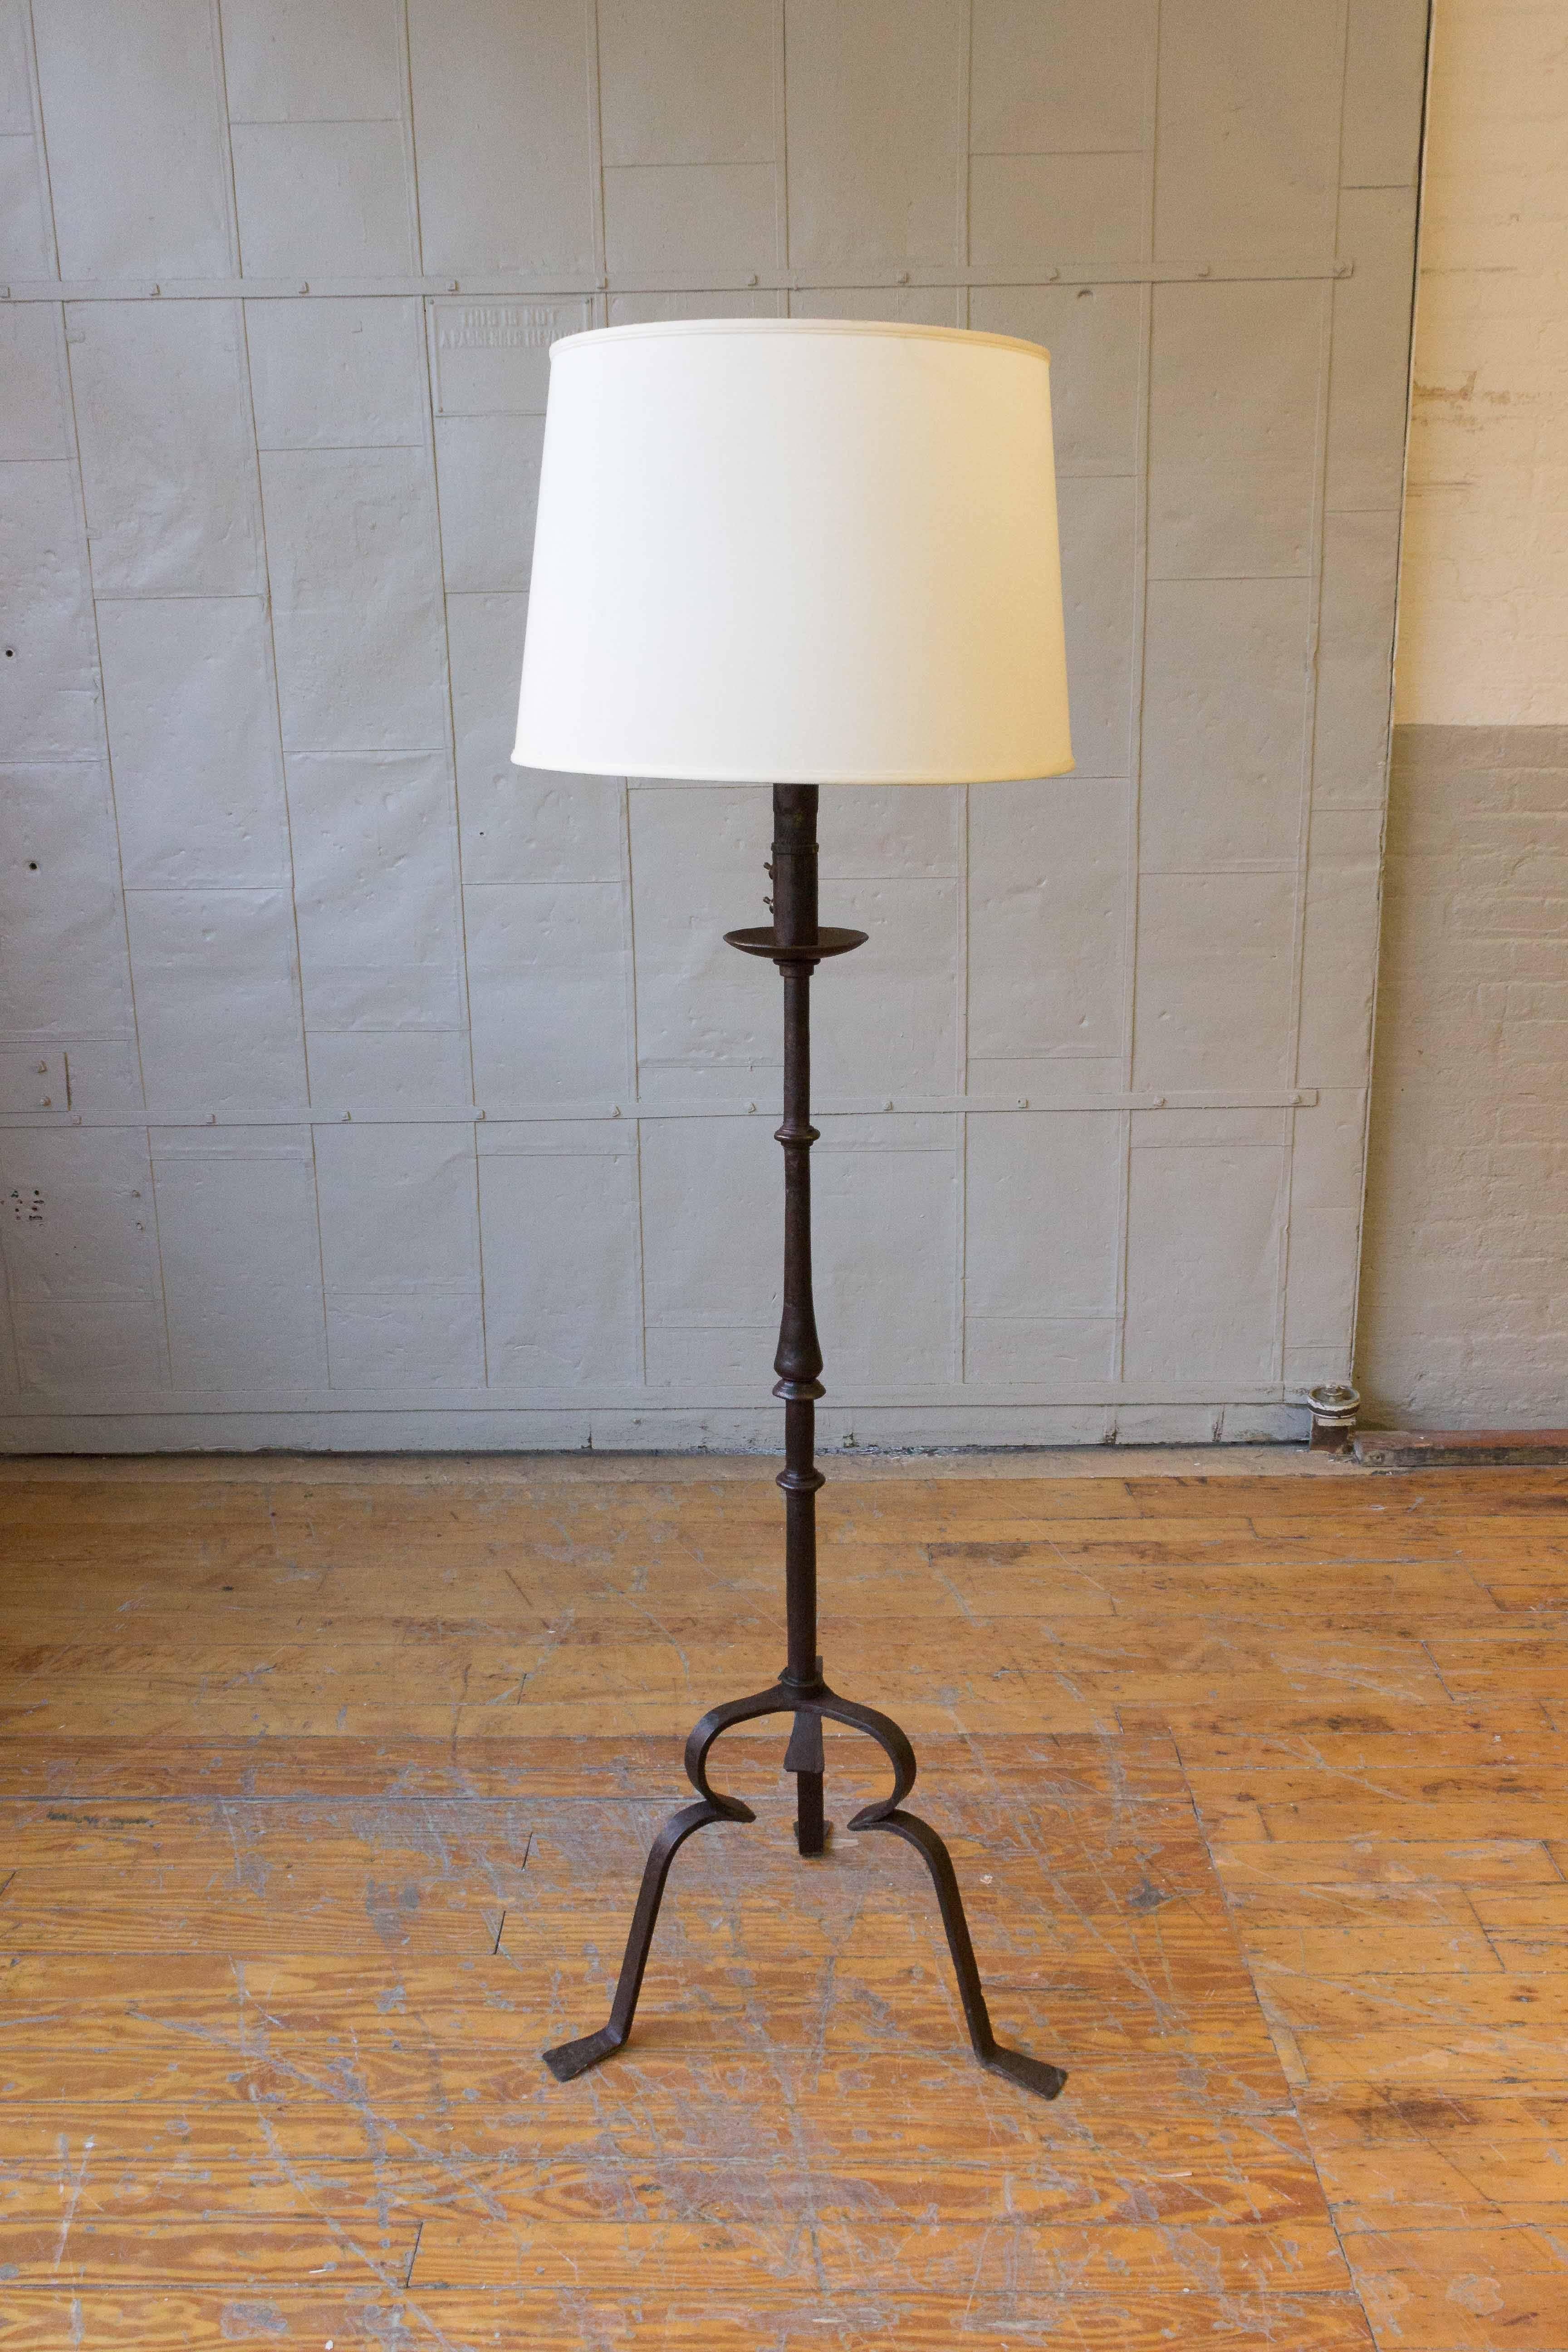 This substantial wrought iron floor lamp exudes elegance and charm. With a weighty feel and sturdy tripod base, the lamp stands tall at 65 inches in height. The iron has a rich patina that adds character and depth to its appearance. The wiring is